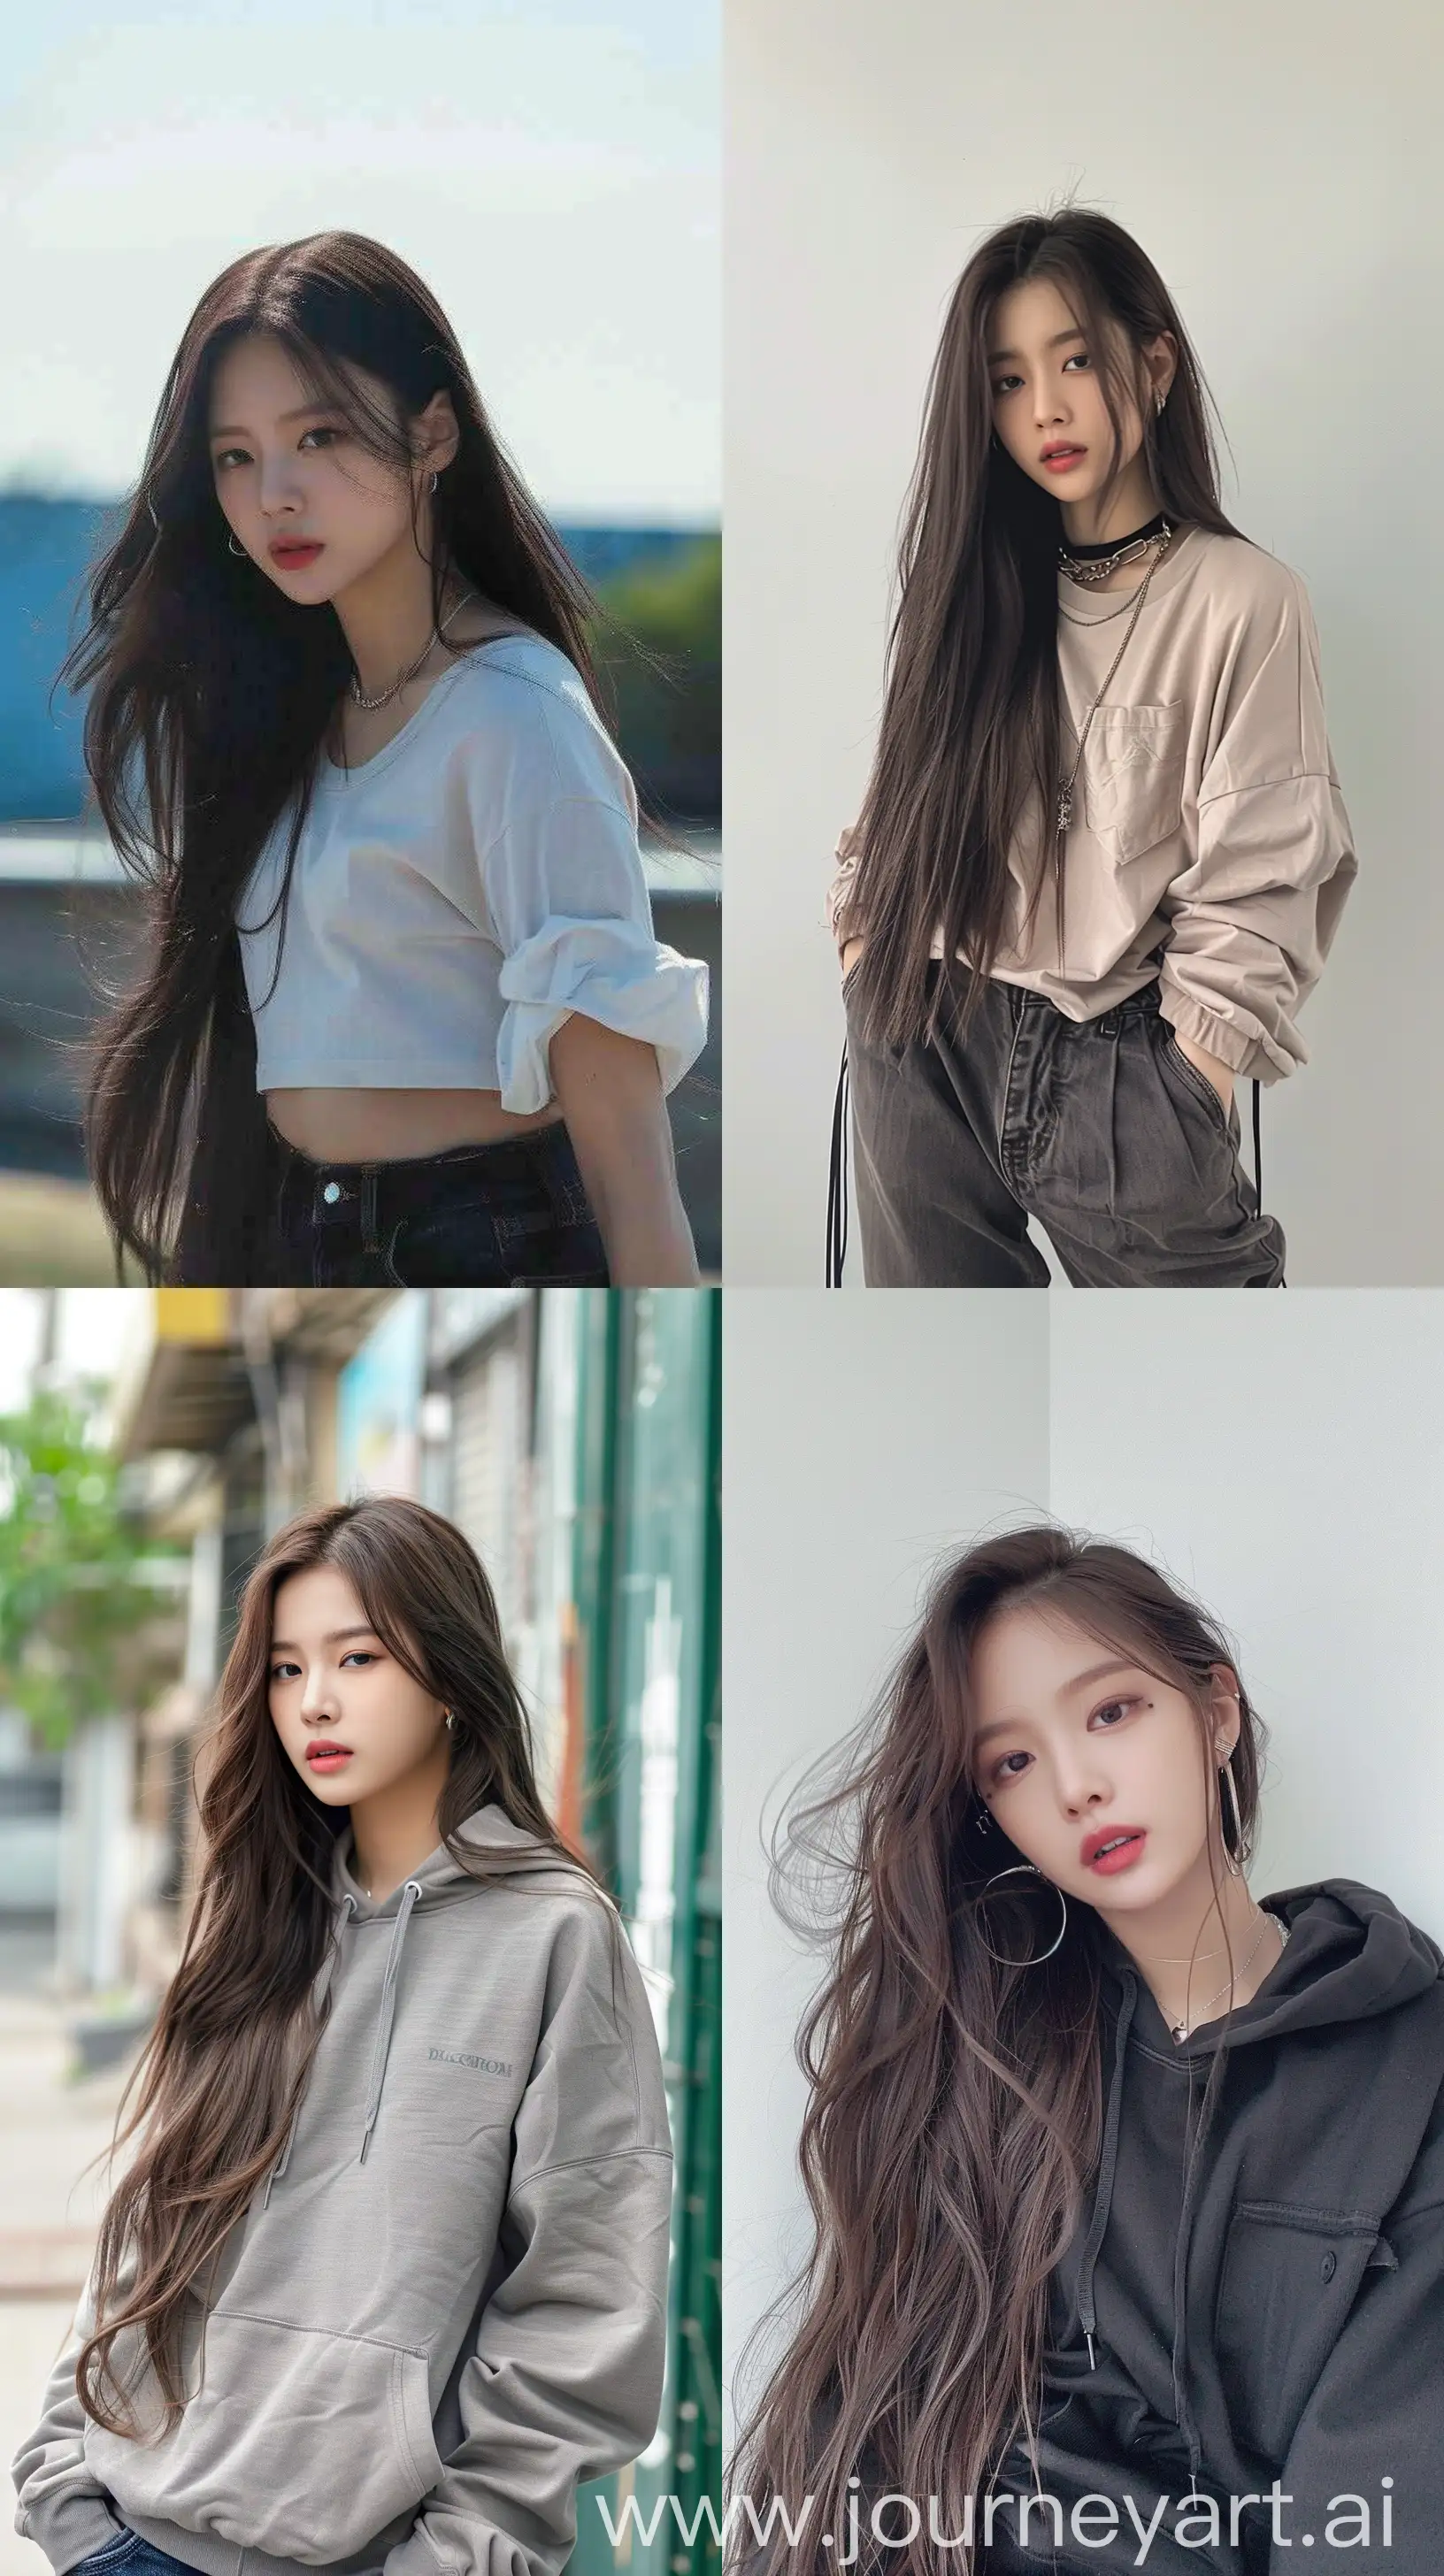 a casual photo, blackpink's jennie, wearing cute simple casual clothes --ar 9:16